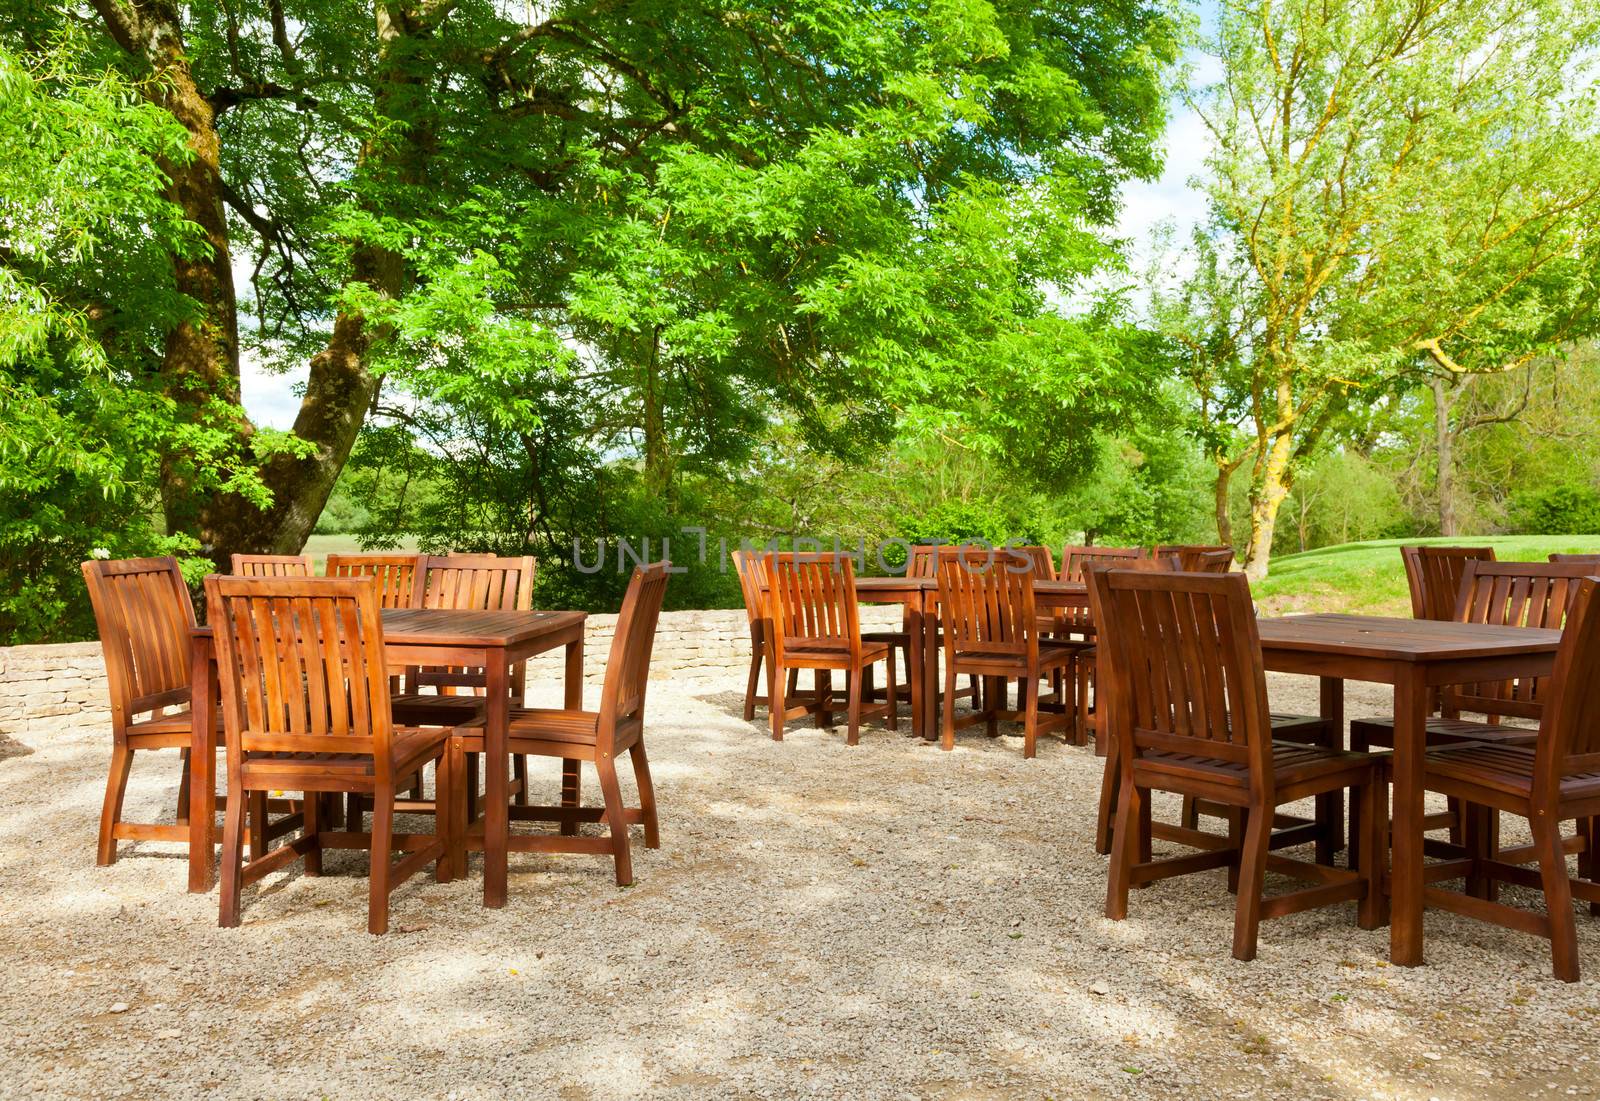 Tables and chairs of outdoor cafe in England